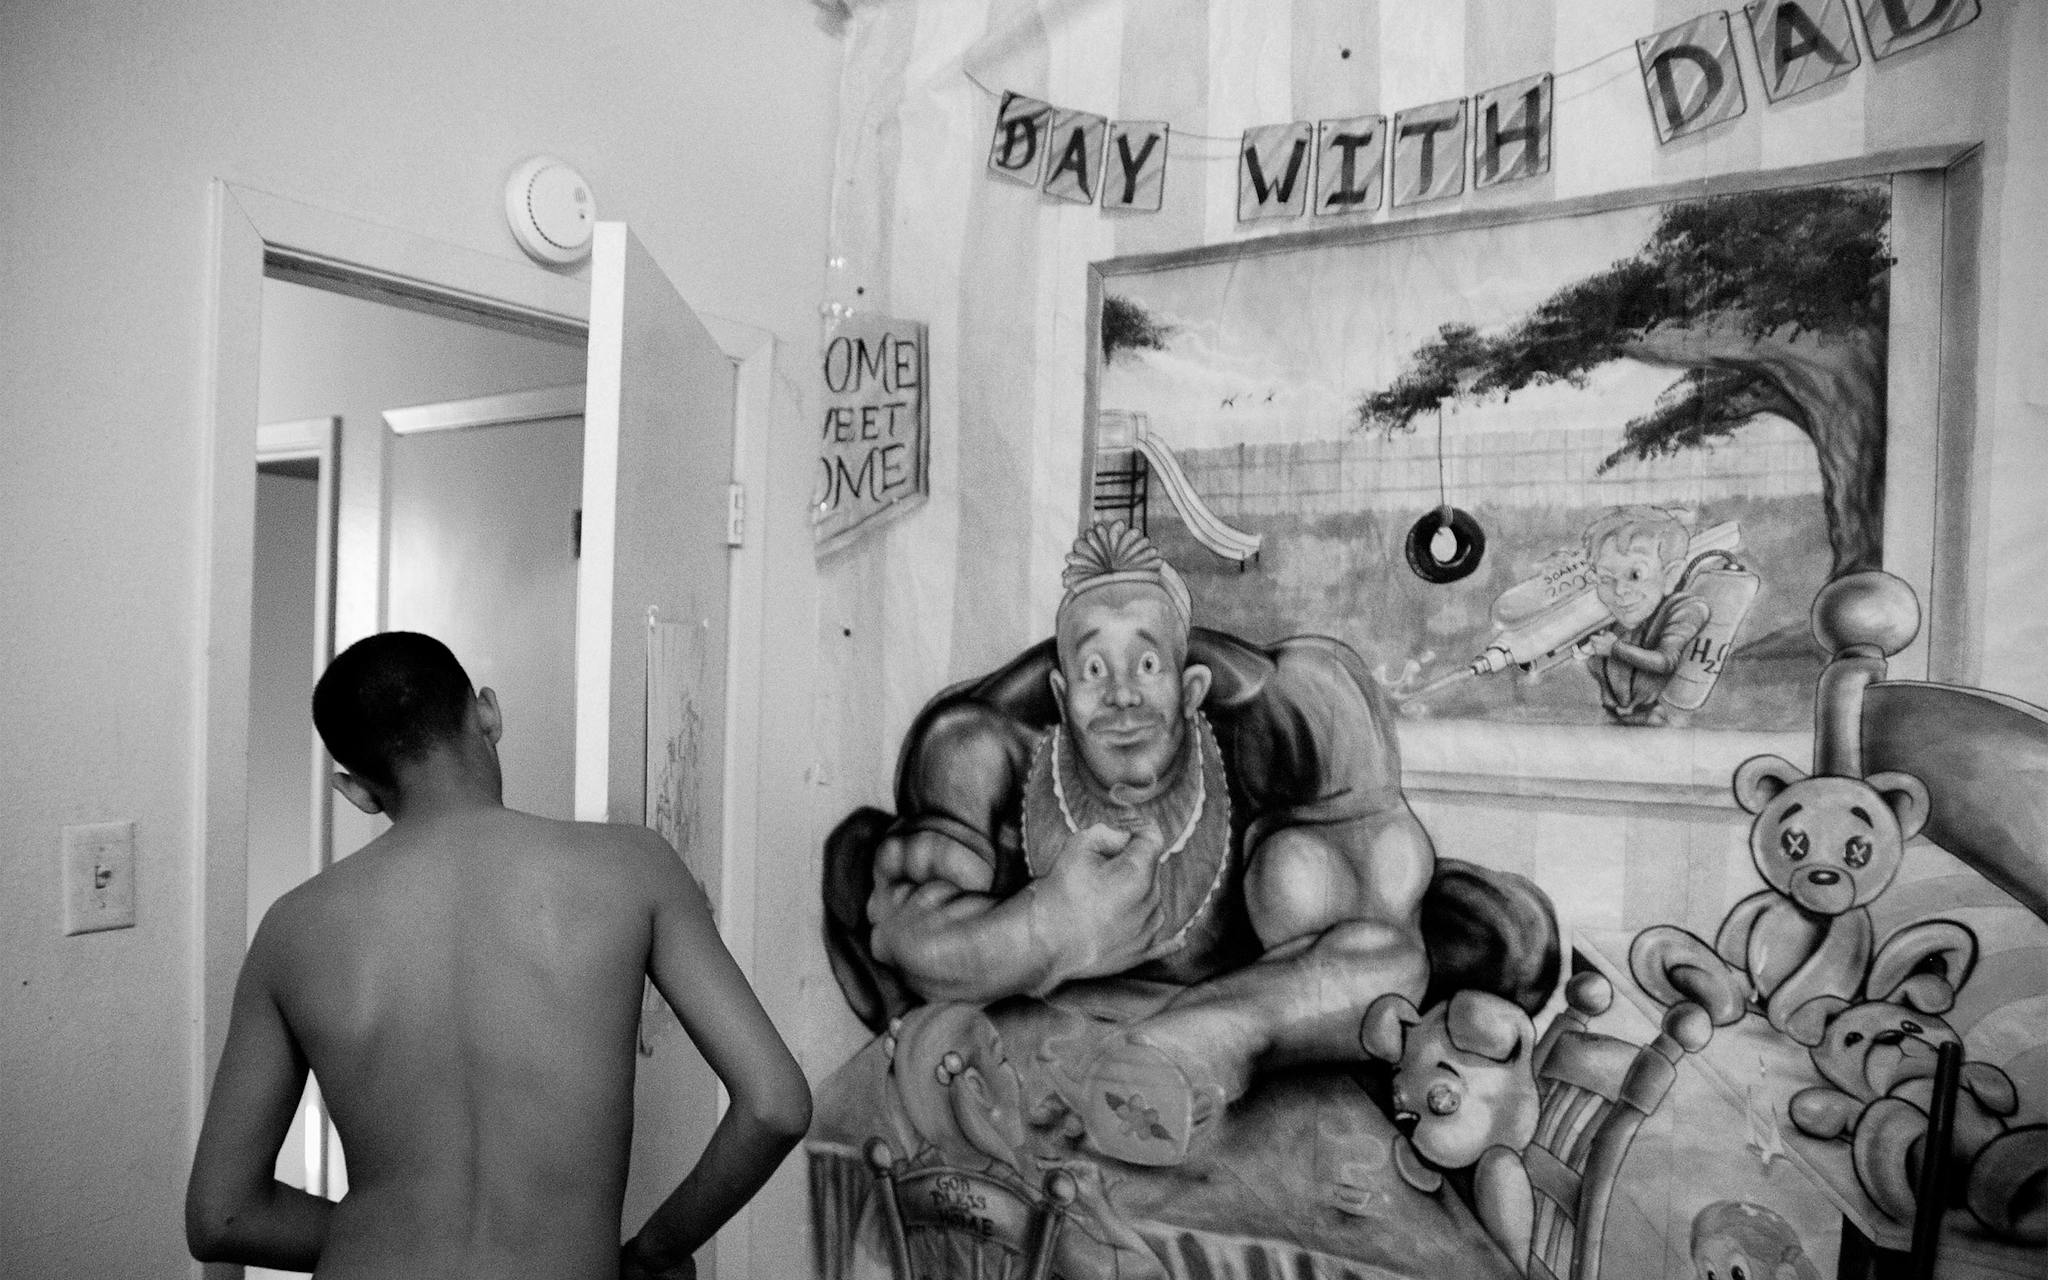 The wall of Christian’s bedroom is covered by a paper mural that his father, Jorge Martinez, painted while he was in prison. Jorge spent more than 8 years of Christian’s childhood incarcerated for aggravated assault. He painted the mural for Christian to commemorate a “Day With Dad,” a special event during which inmates were allowed to play with their children for a day on the prison grounds.